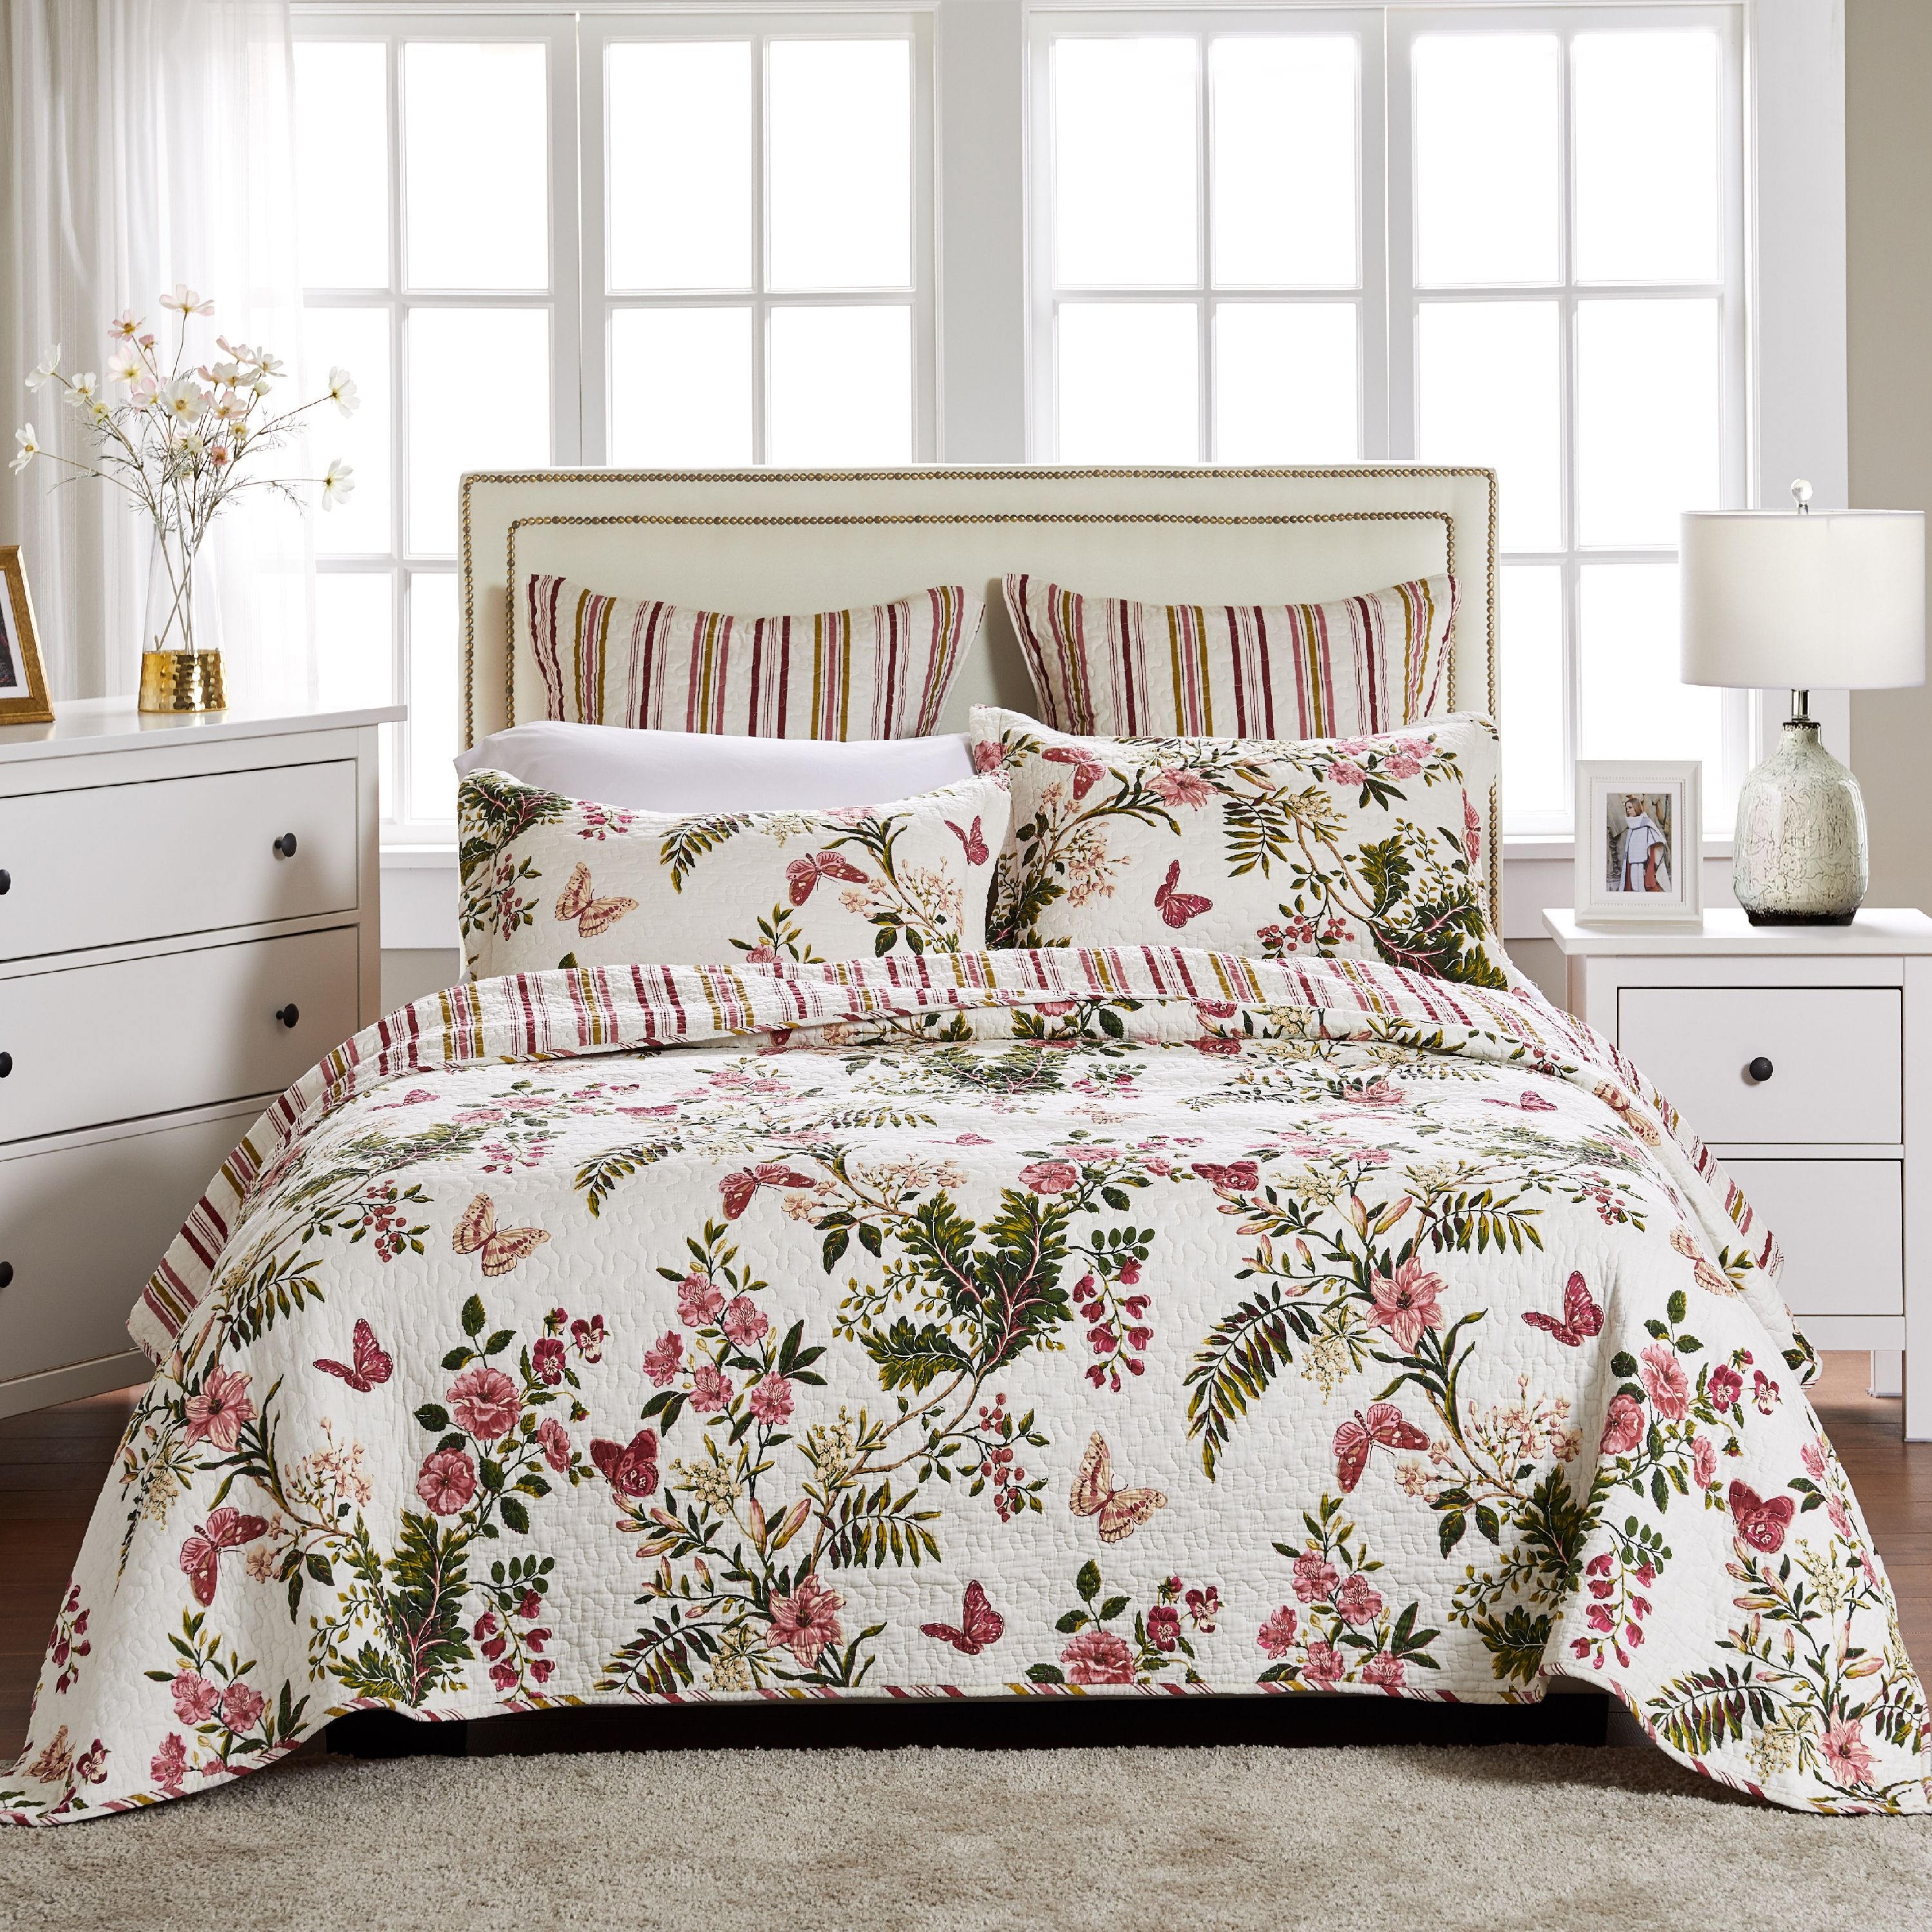 Greenland Home Butterflies 100% Cotton Reversible Oversized Botanical Quilt Set, 2-Piece Twin/Twin XL - image 2 of 5